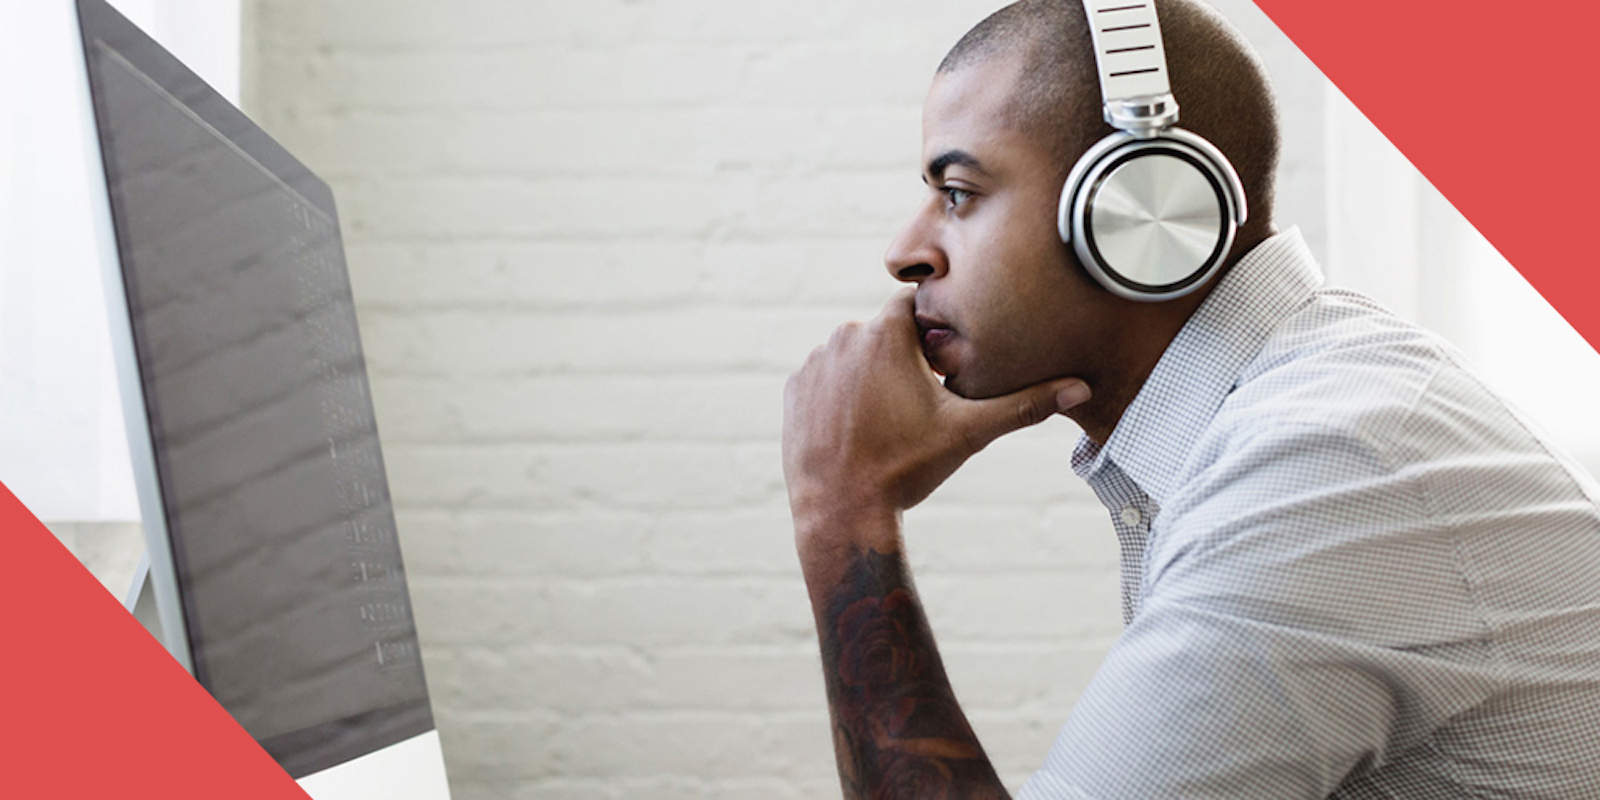 Let these scientifically curated music streaming channels help you stay focused and on task.